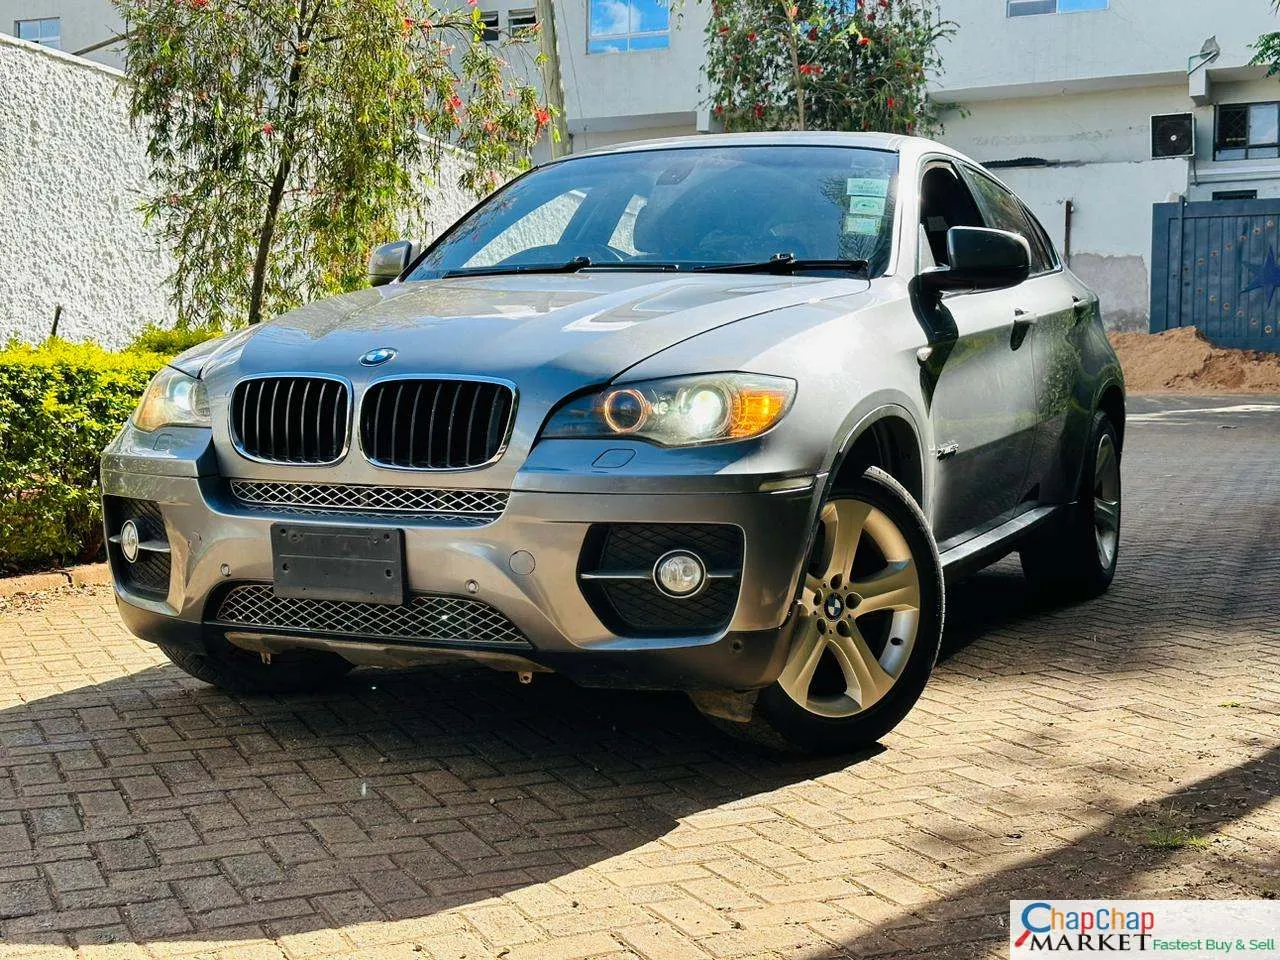 Bmw X6 Kenya 🔥 You Pay 30% DEPOSIT Trade in Ok EXCLUSIVE BMW x6 for sale in kenya hire purchase installments